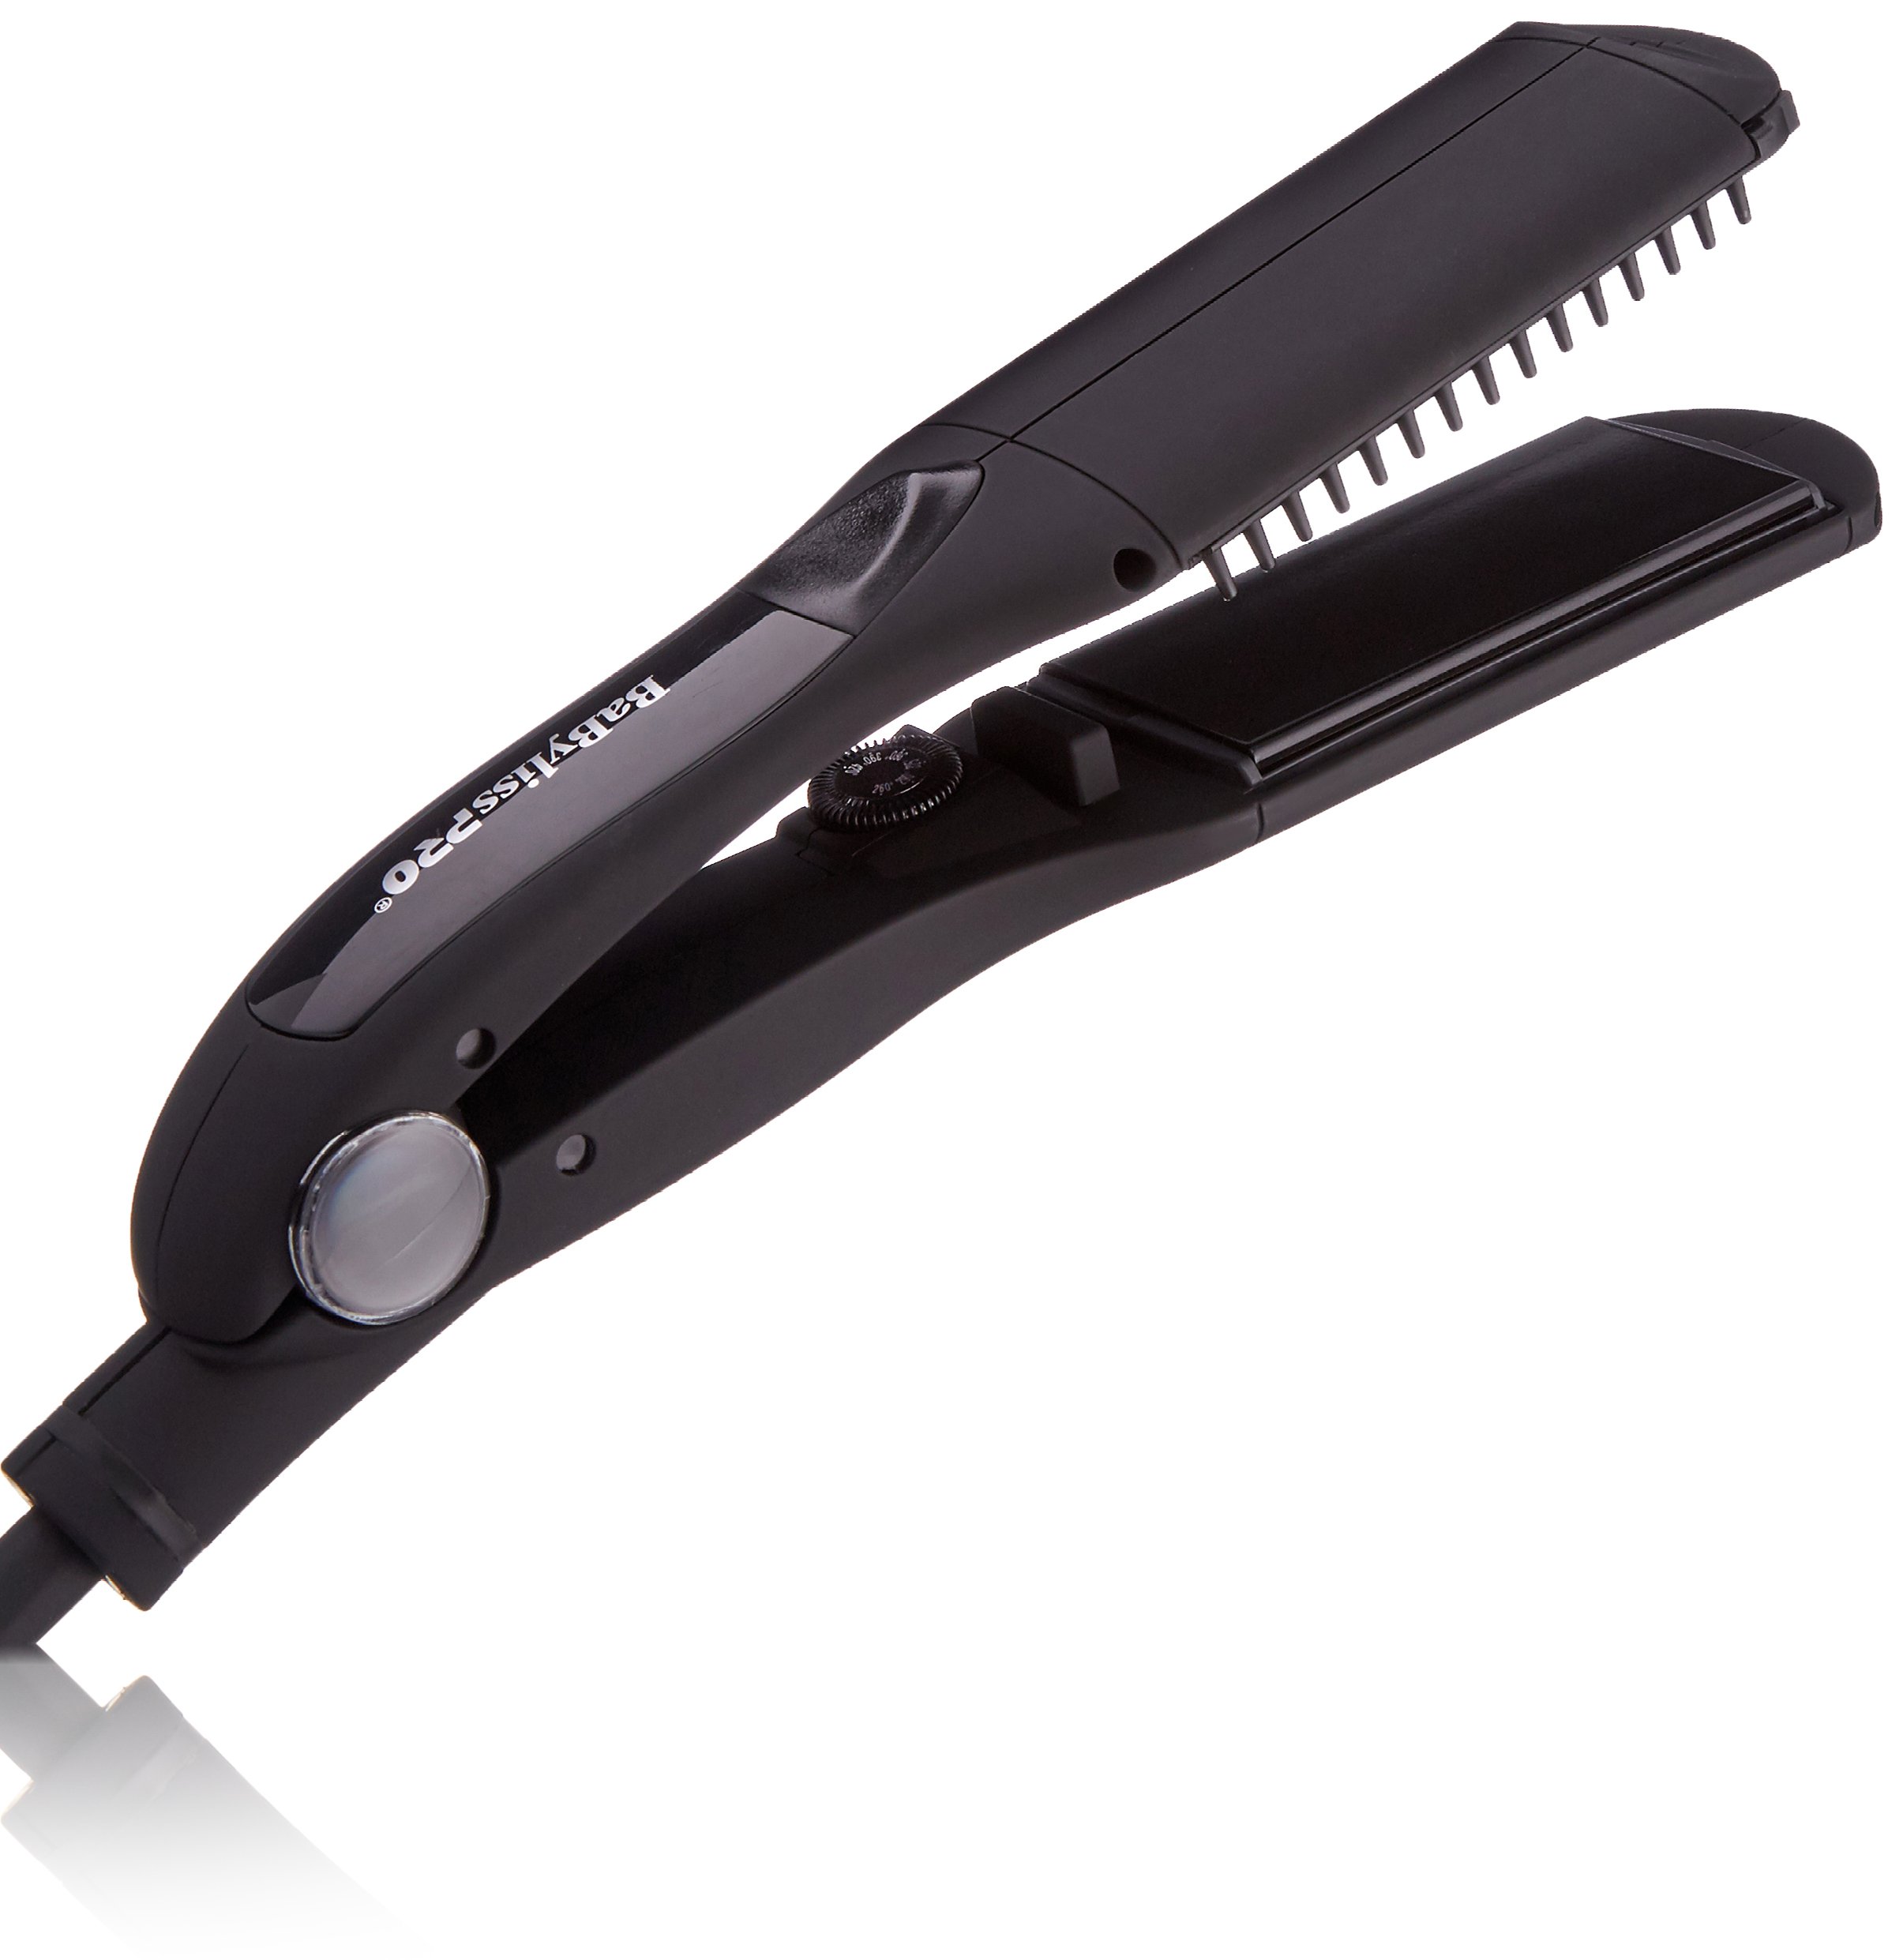  BaBylissPRO Porcelain Ceramic Straightening Iron (with comb teeth)